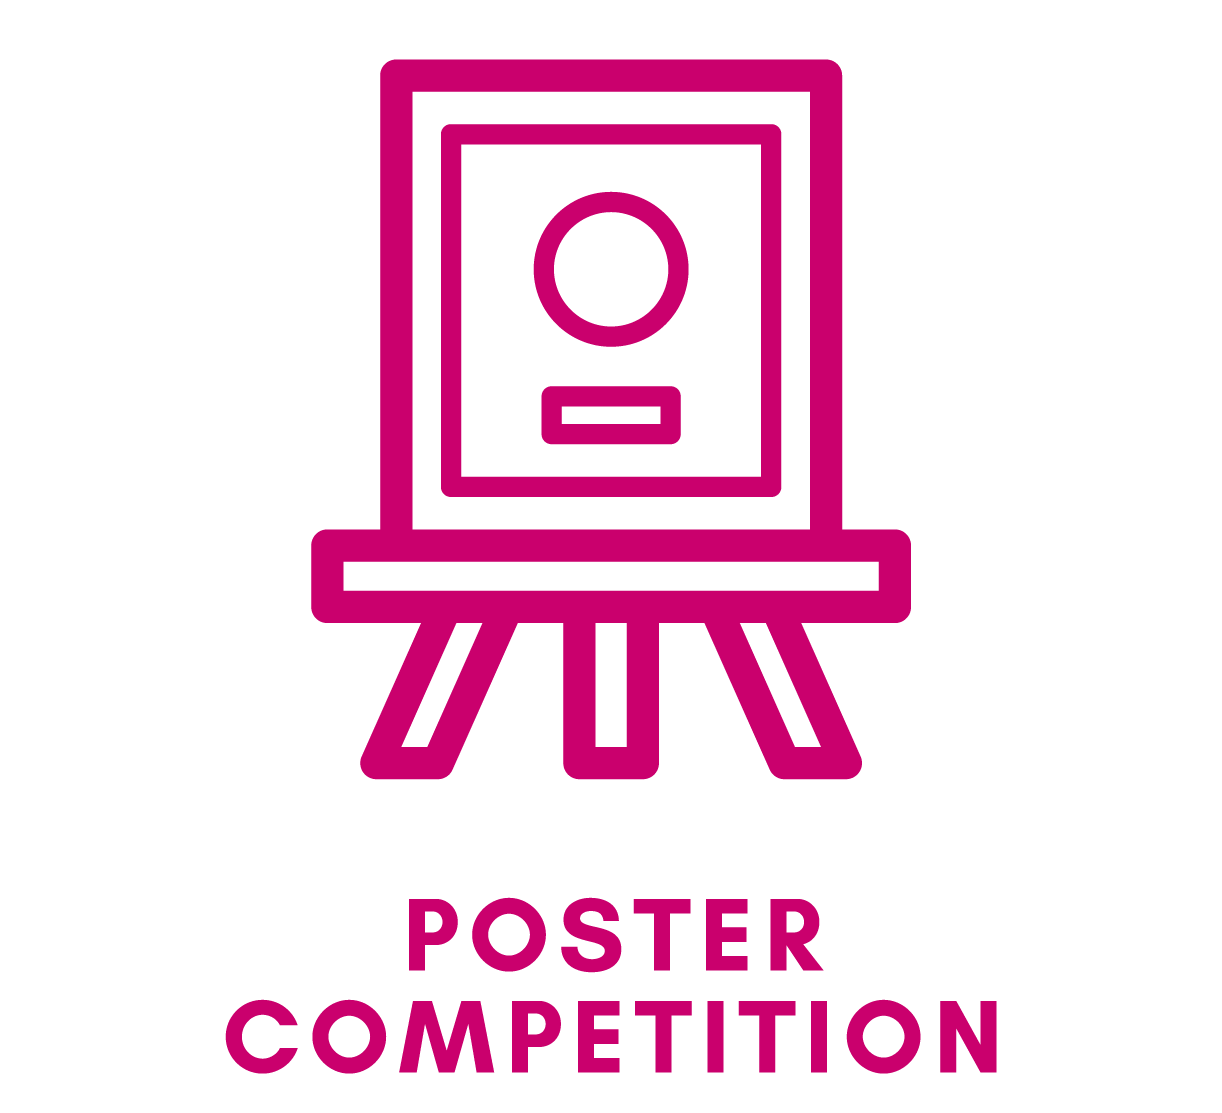 IM-icon-poster-competition.png